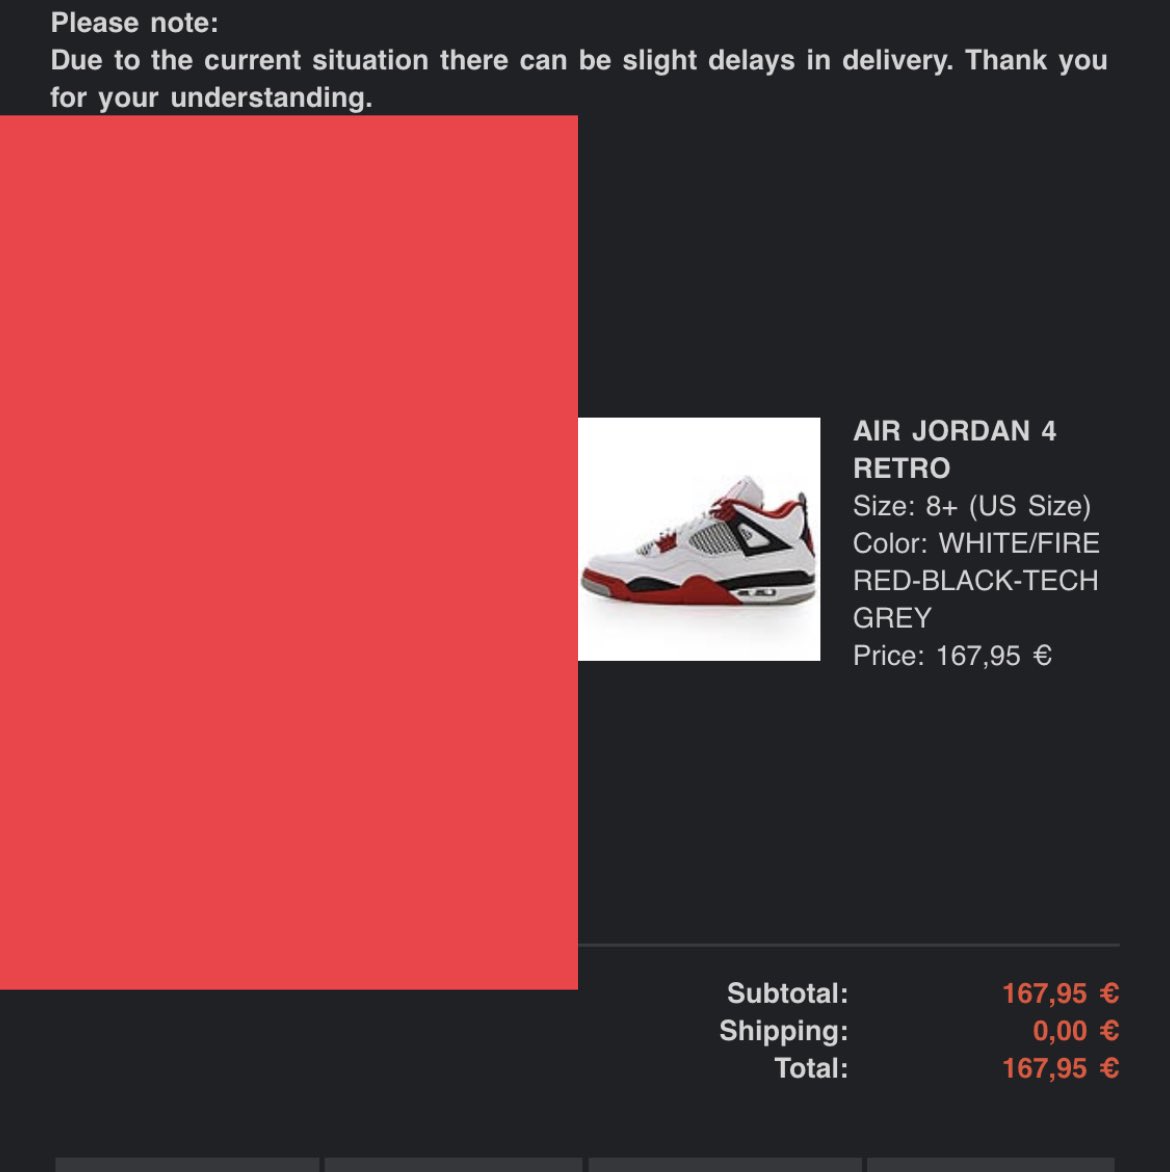 THX @saucemonitor for the monitor and quick task link @theKickStation & @TheBlankProxies